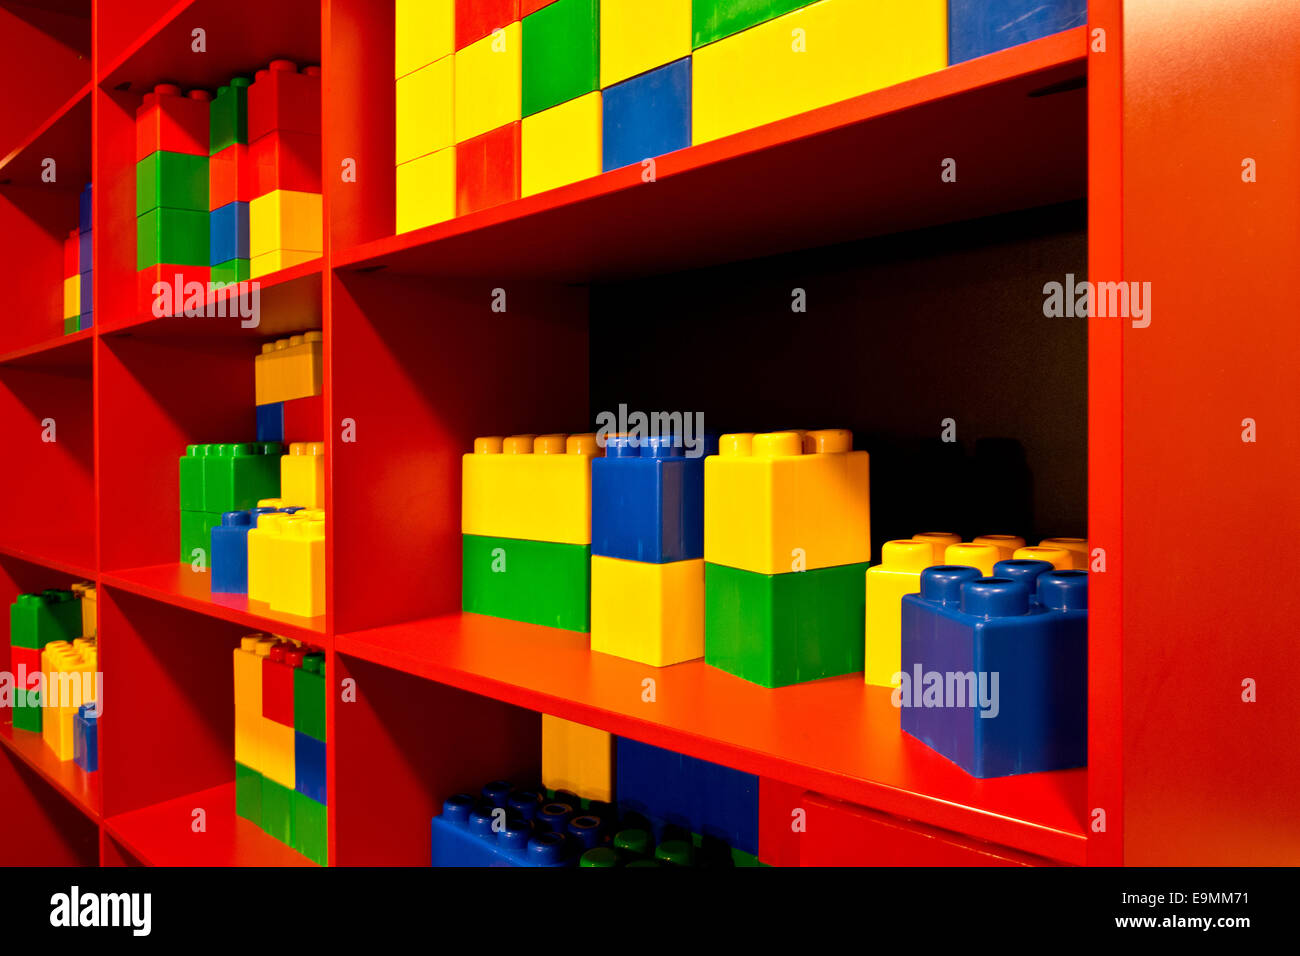 detail of colored cubes in the red shelf Stock Photo